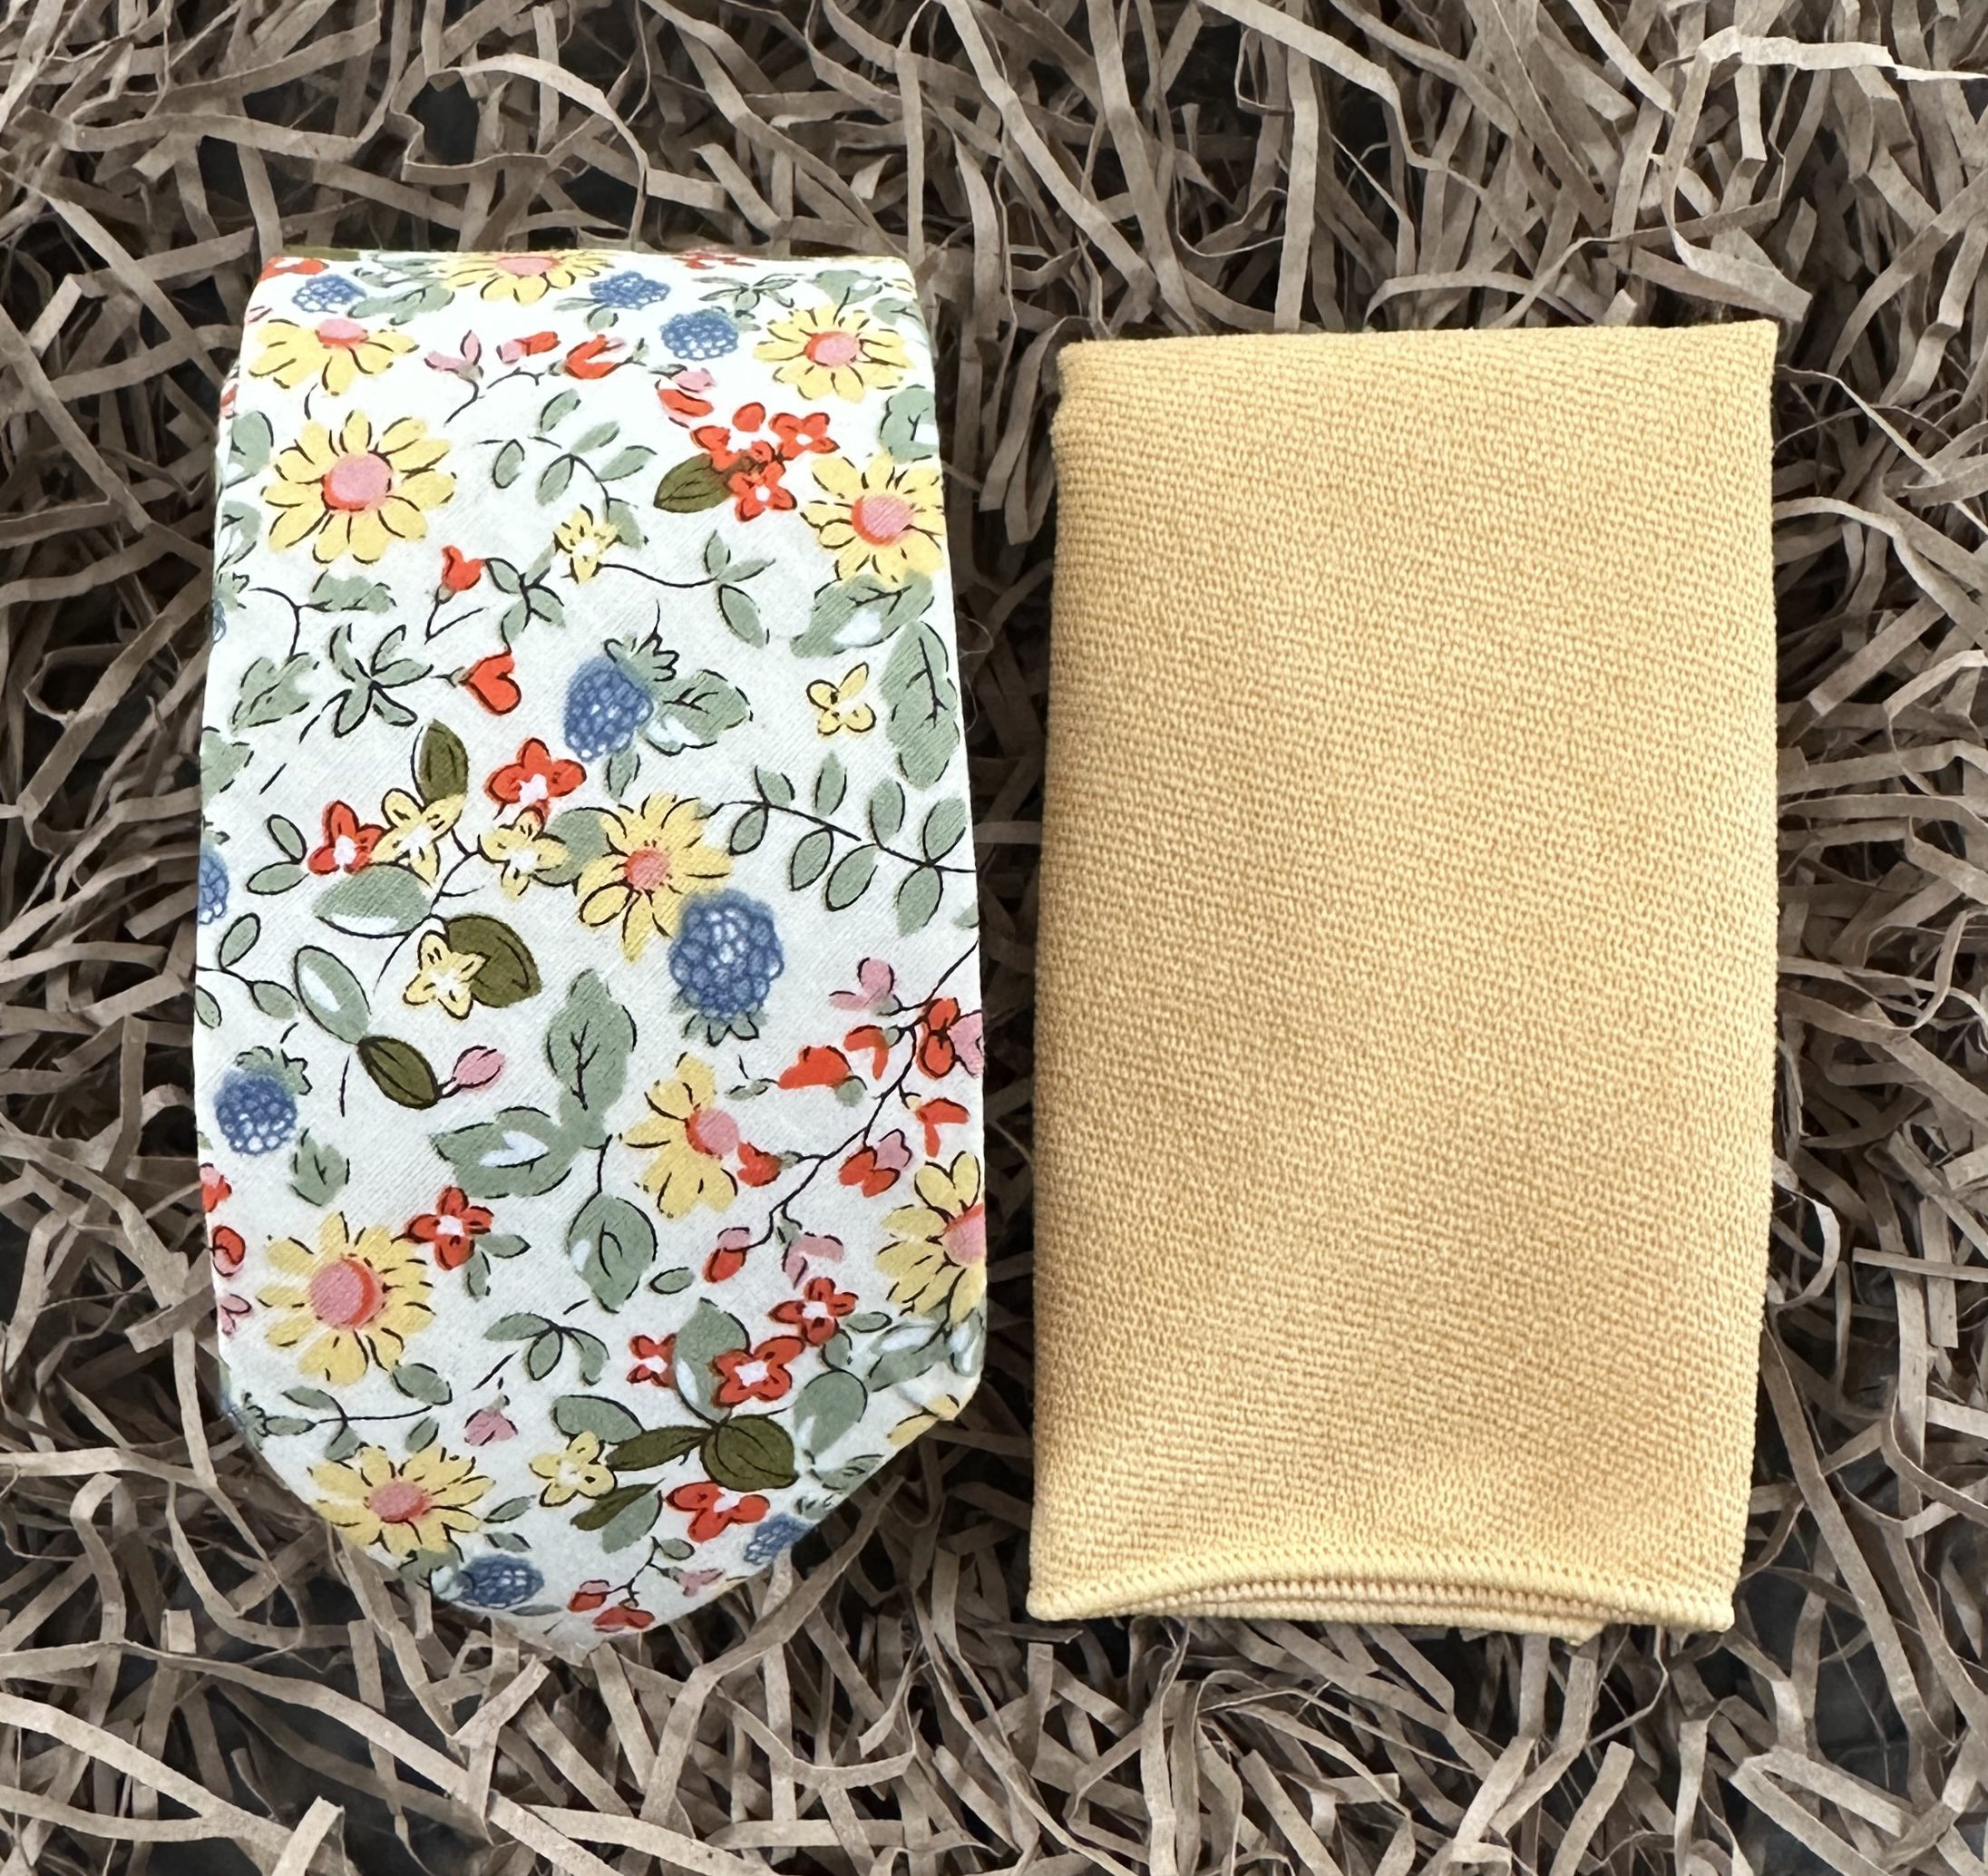 A photo of a yellow floral spring tie for men and women matched with a yellow pocket handkerchief.